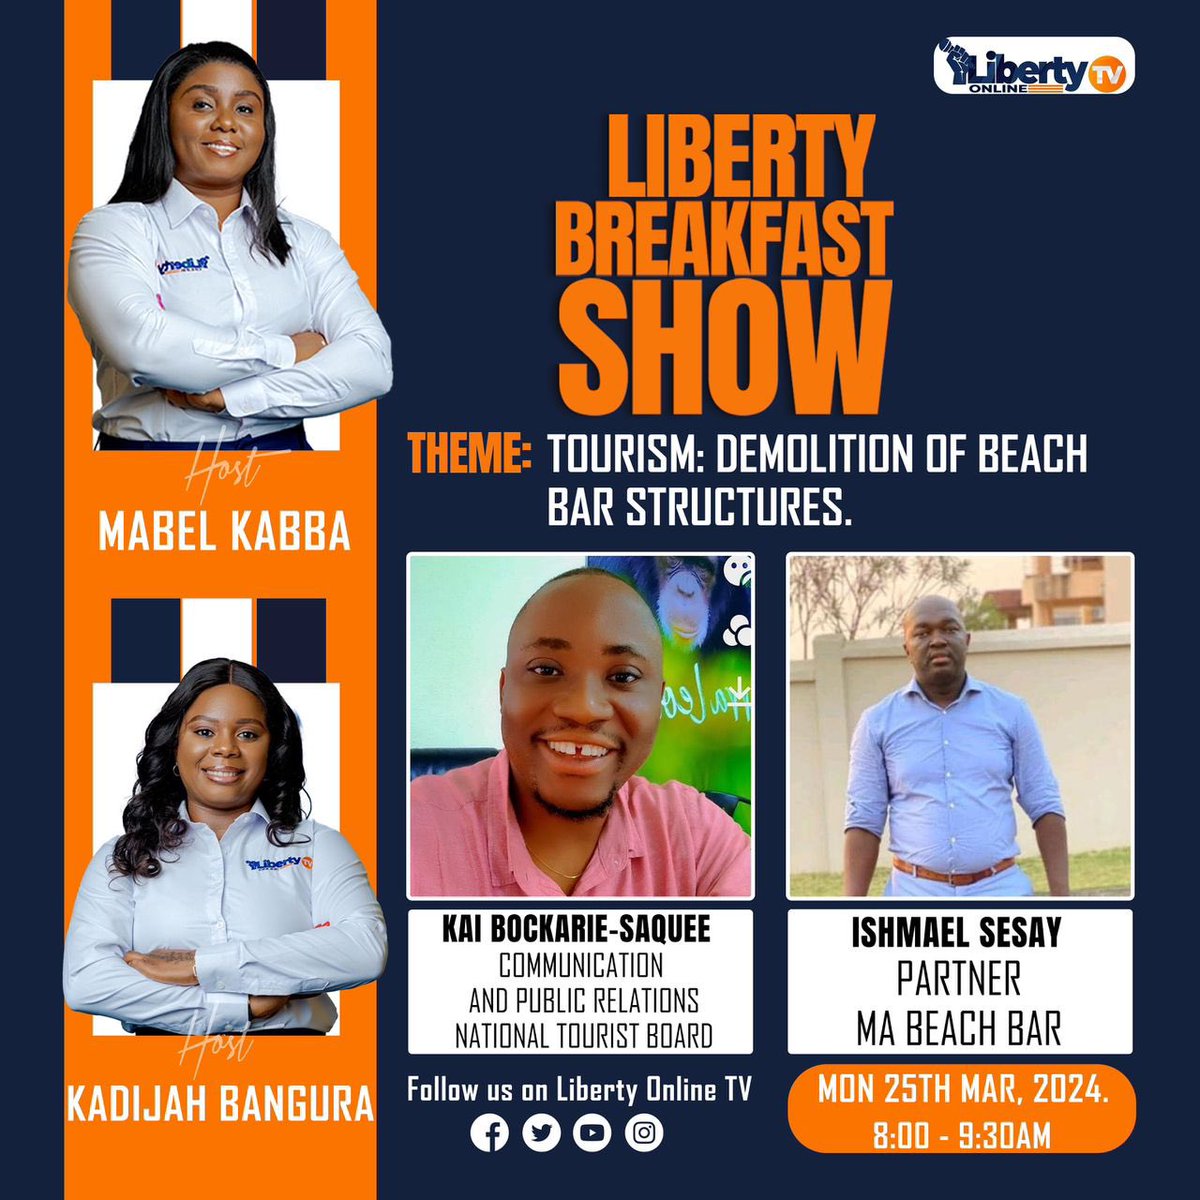 Following the demolition of beachfront structures at Lumley Beach, beach bar owners are seeking clarity. Kindly join us on our March 25th edition of the Liberty Breakfast Show for a panel discussion addressing the recent demolition of beach structures along Lumley Beach. #SL